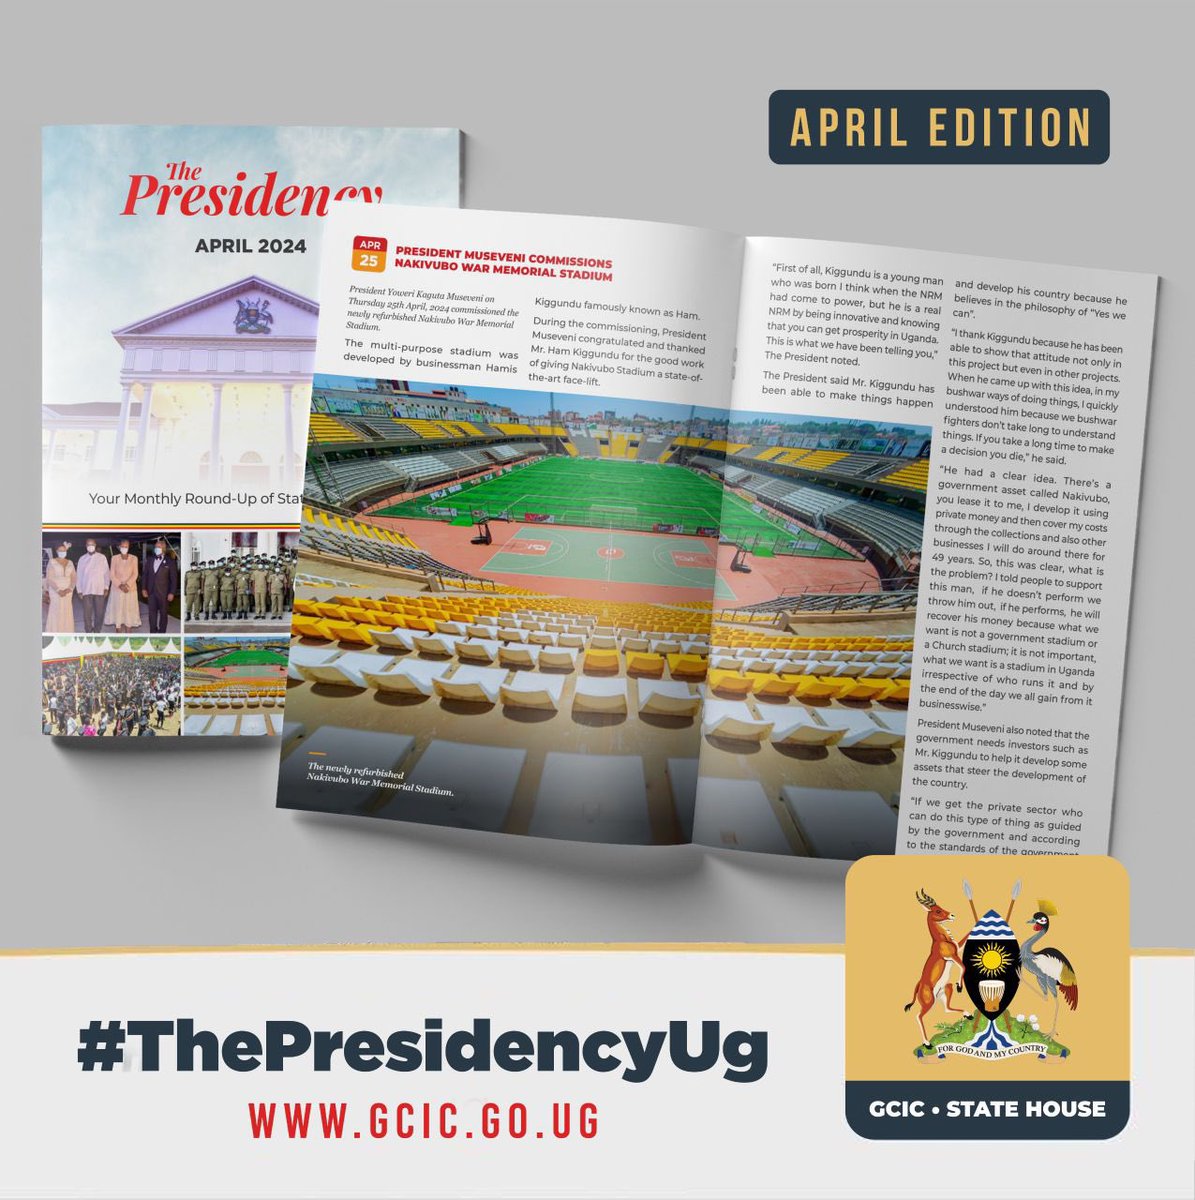 This Monday, we will be releasing the April edition of our e-magazine #ThePresidencyUg. Stay tuned!!